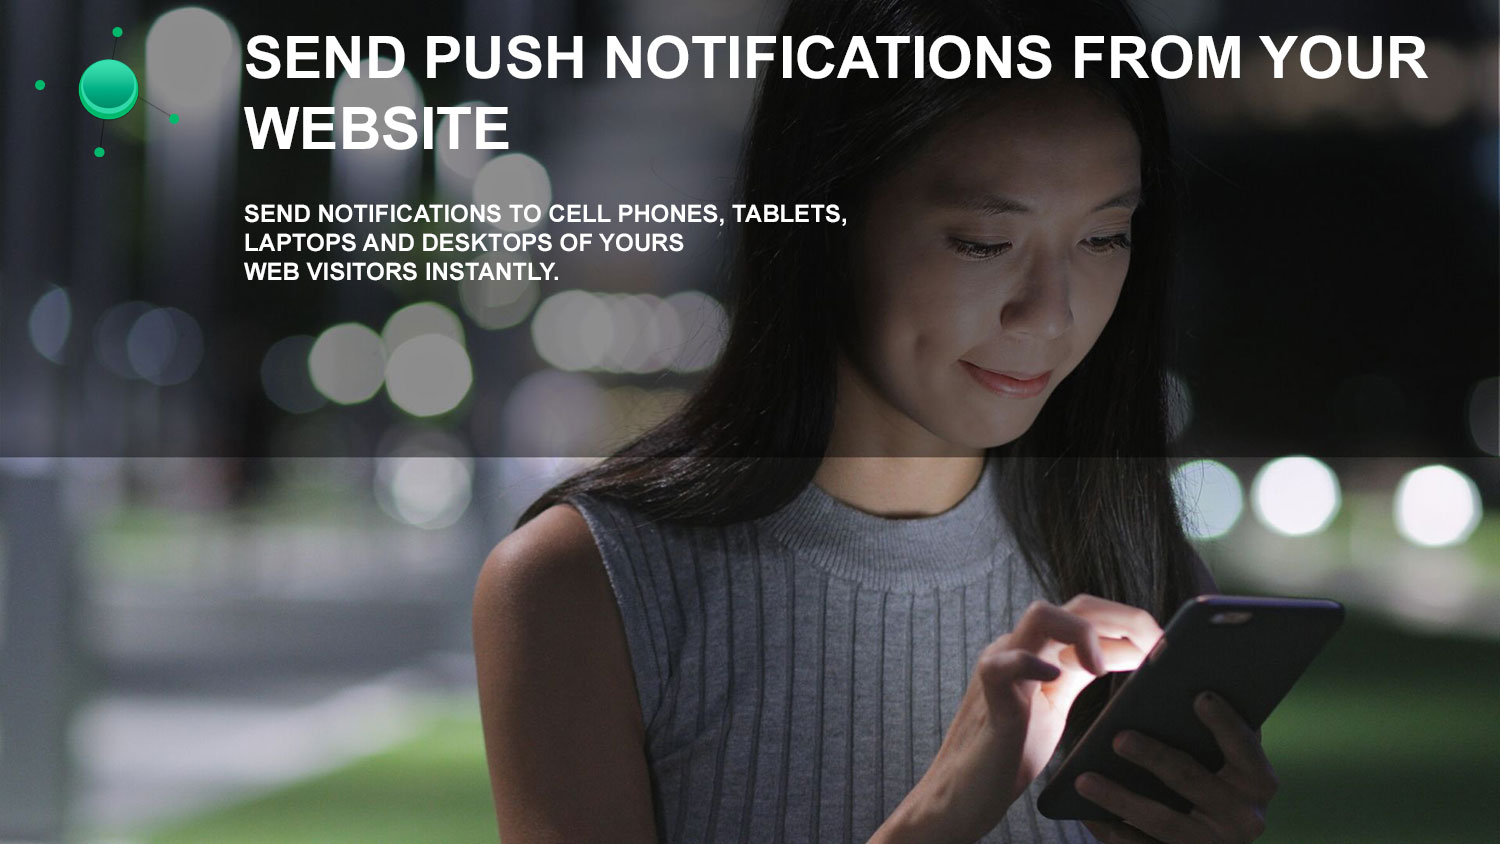 NotificationButton - Send notifications from your website